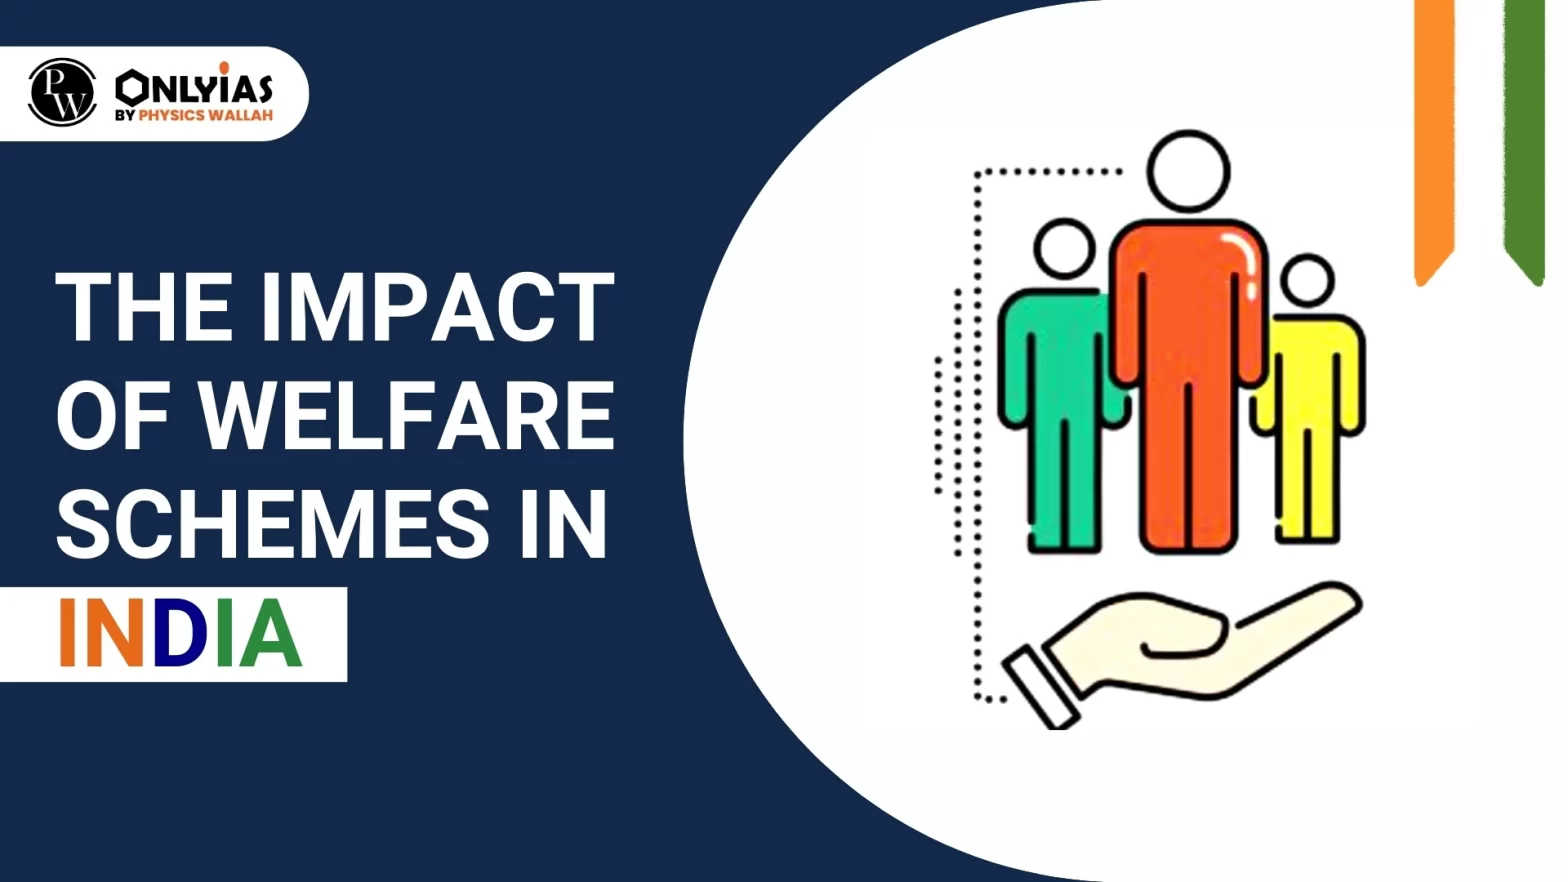 The Impact of Welfare Schemes in India